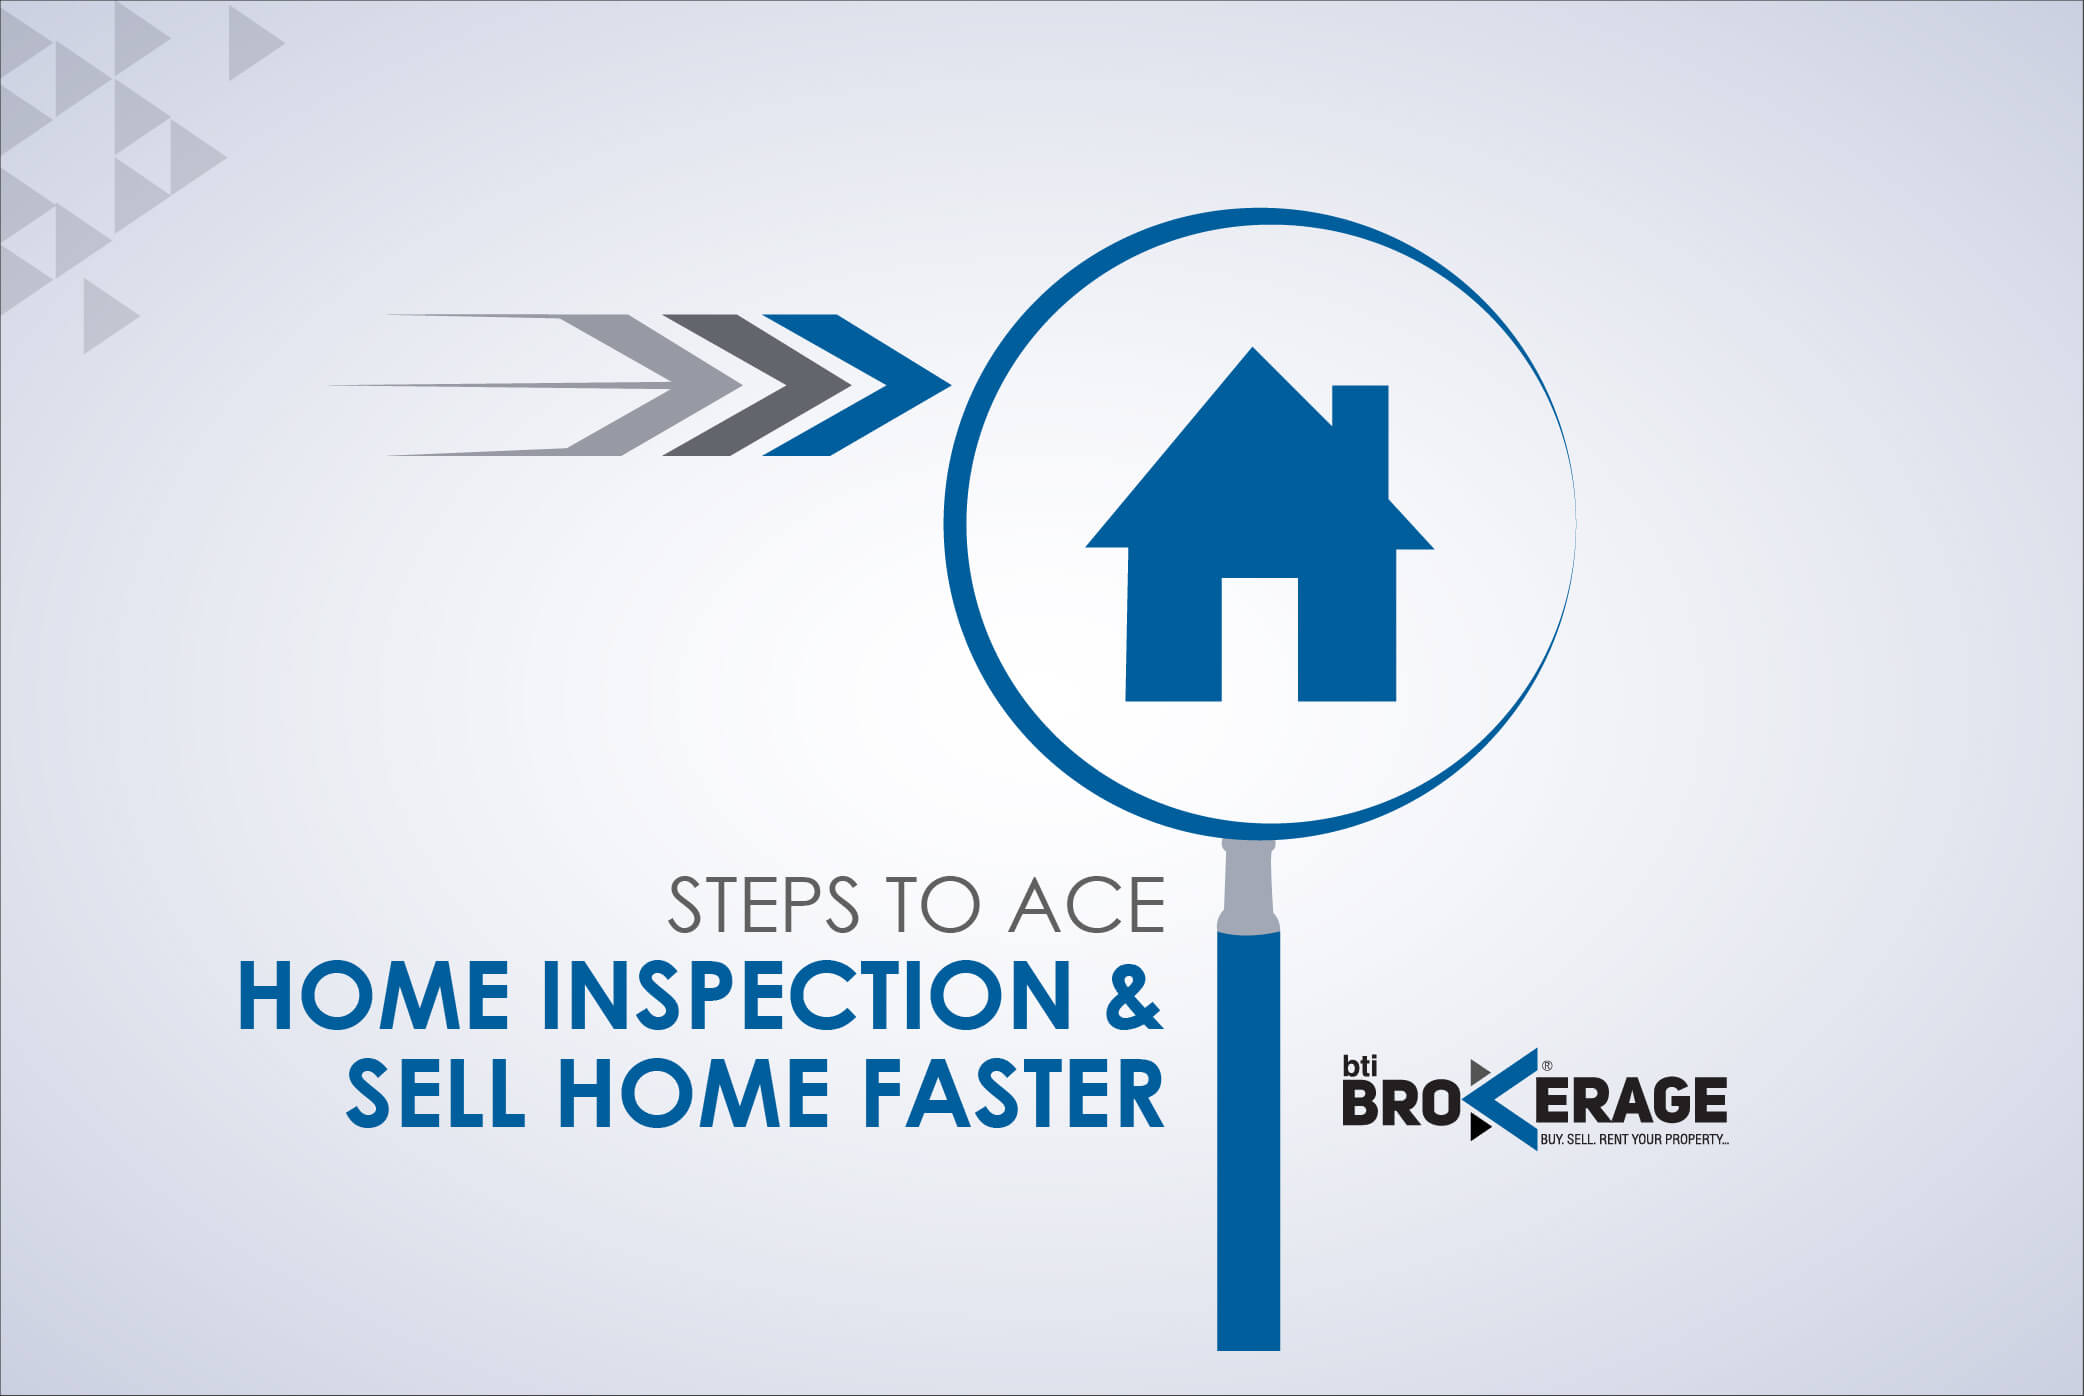 steps-to-ace-home-inspection-and-sell-home-faster-641522